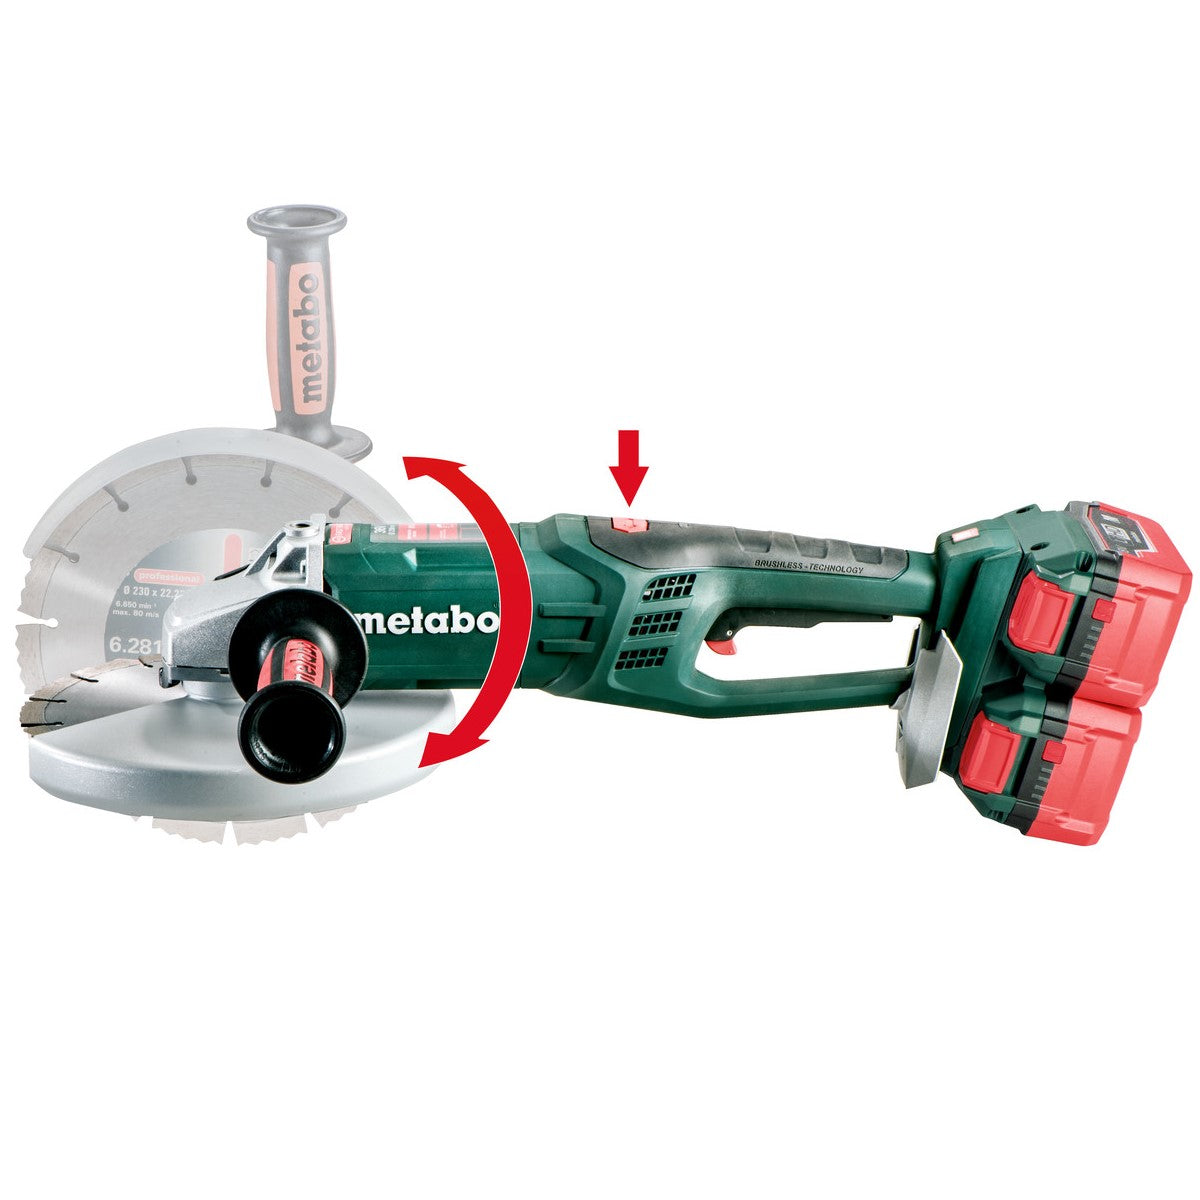 Metabo (613102860) 9 inch 18V Cordless Angle Grinder Bare Tool image 1 of 3 image 2 of 3